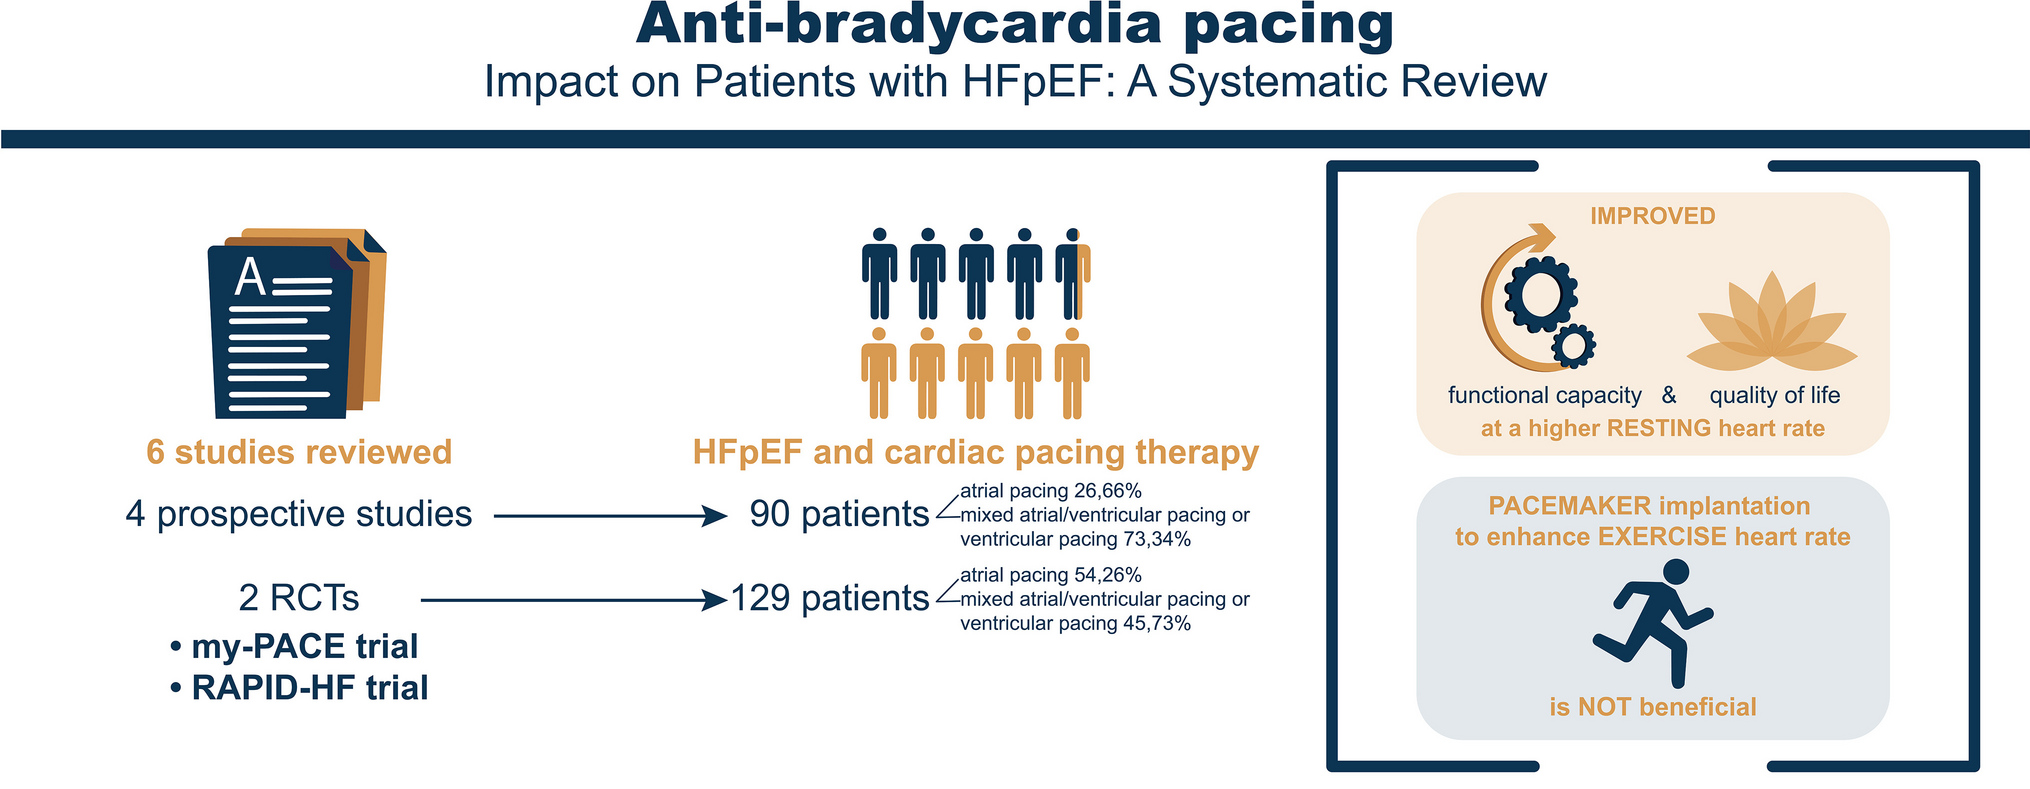 Anti-bradycardia pacing—impact on patients with HFpEF: a systematic review